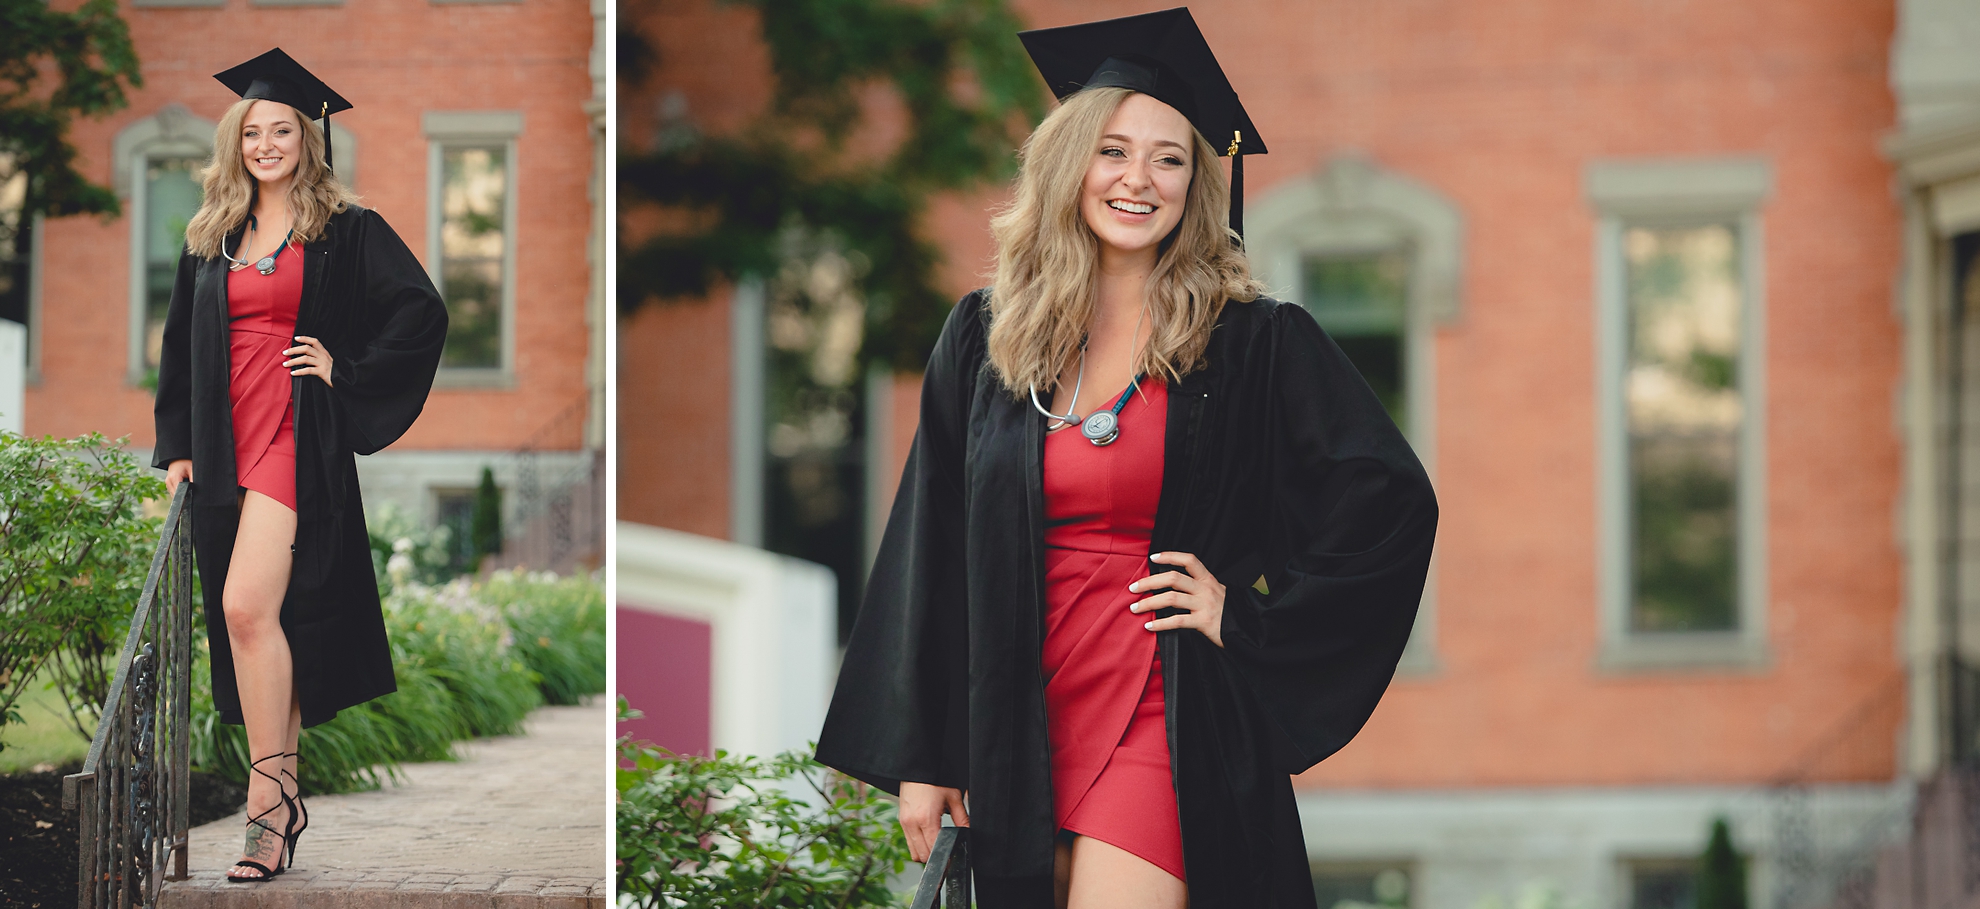 D'youville nursing student smiles for photographer in cap and gown during senior graduation portrait photography session in Buffalo, NY